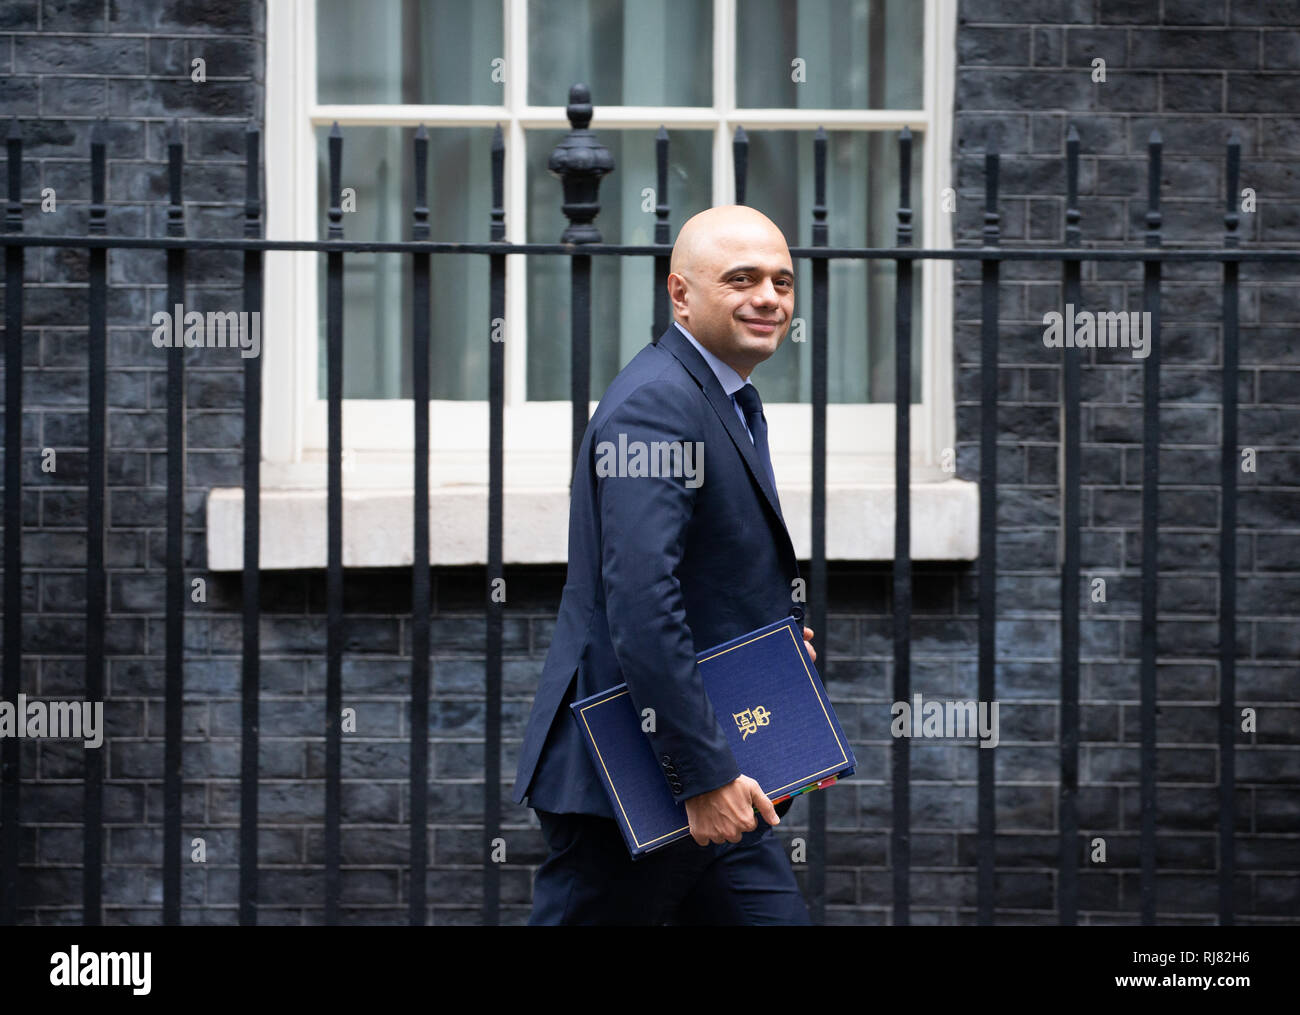 London, UK. 05th Feb, 2019. Sajid Javid, Secretary of State for the Home Department, leaves the Cabinet Meeting. Credit: Tommy London/Alamy Live News Stock Photo